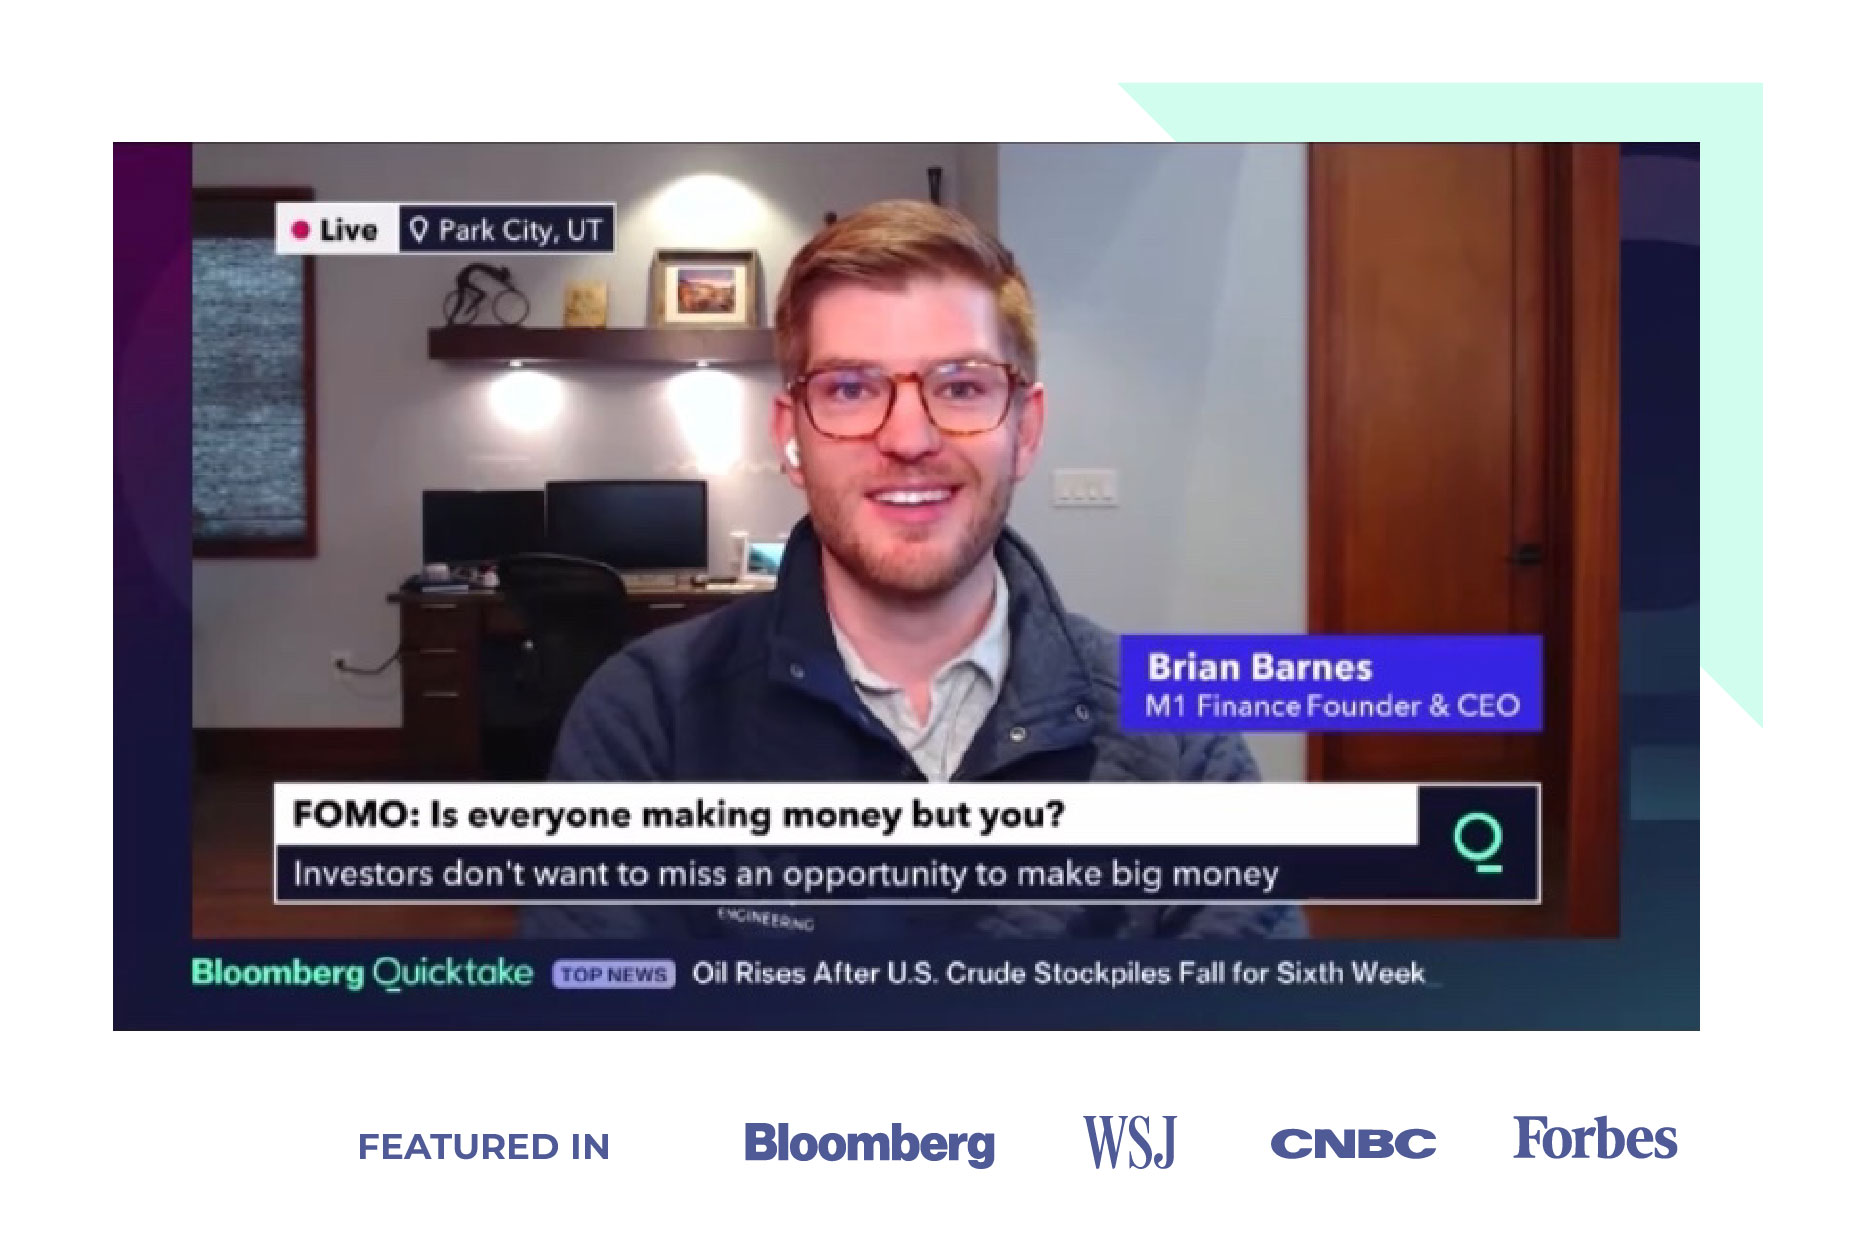 Image of Brian Barnes doing an internview with Bloomberg. And a liste of Featured In logos including Bloomberg, WSJ, CNBC and Forbes